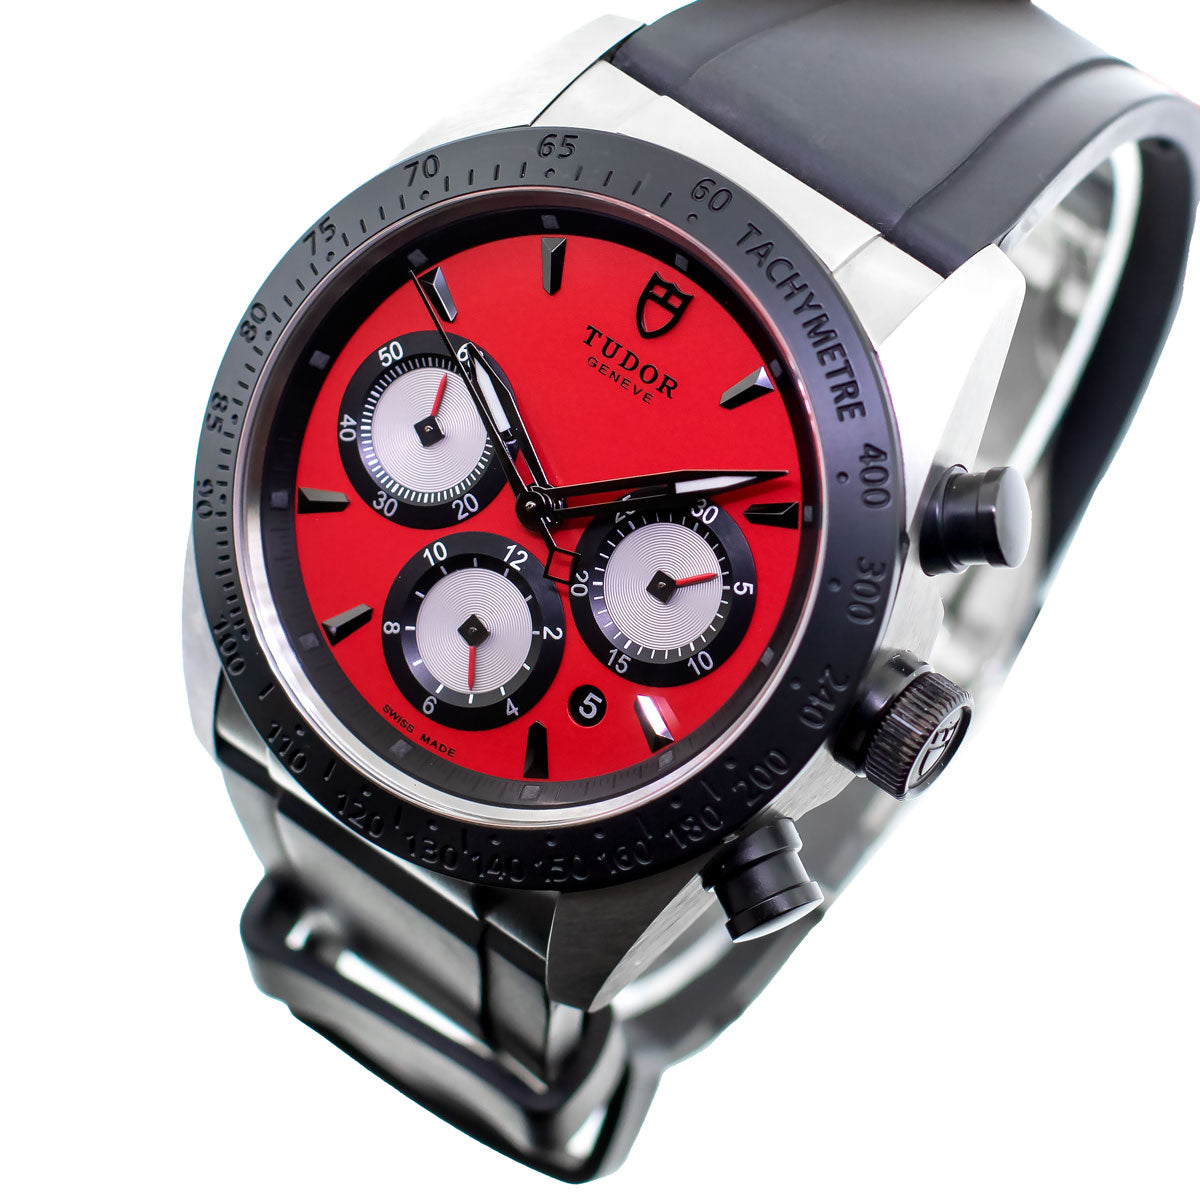 Tudor Fastrider Chronograph 42mm Stainless Steel Red Dial 42010N